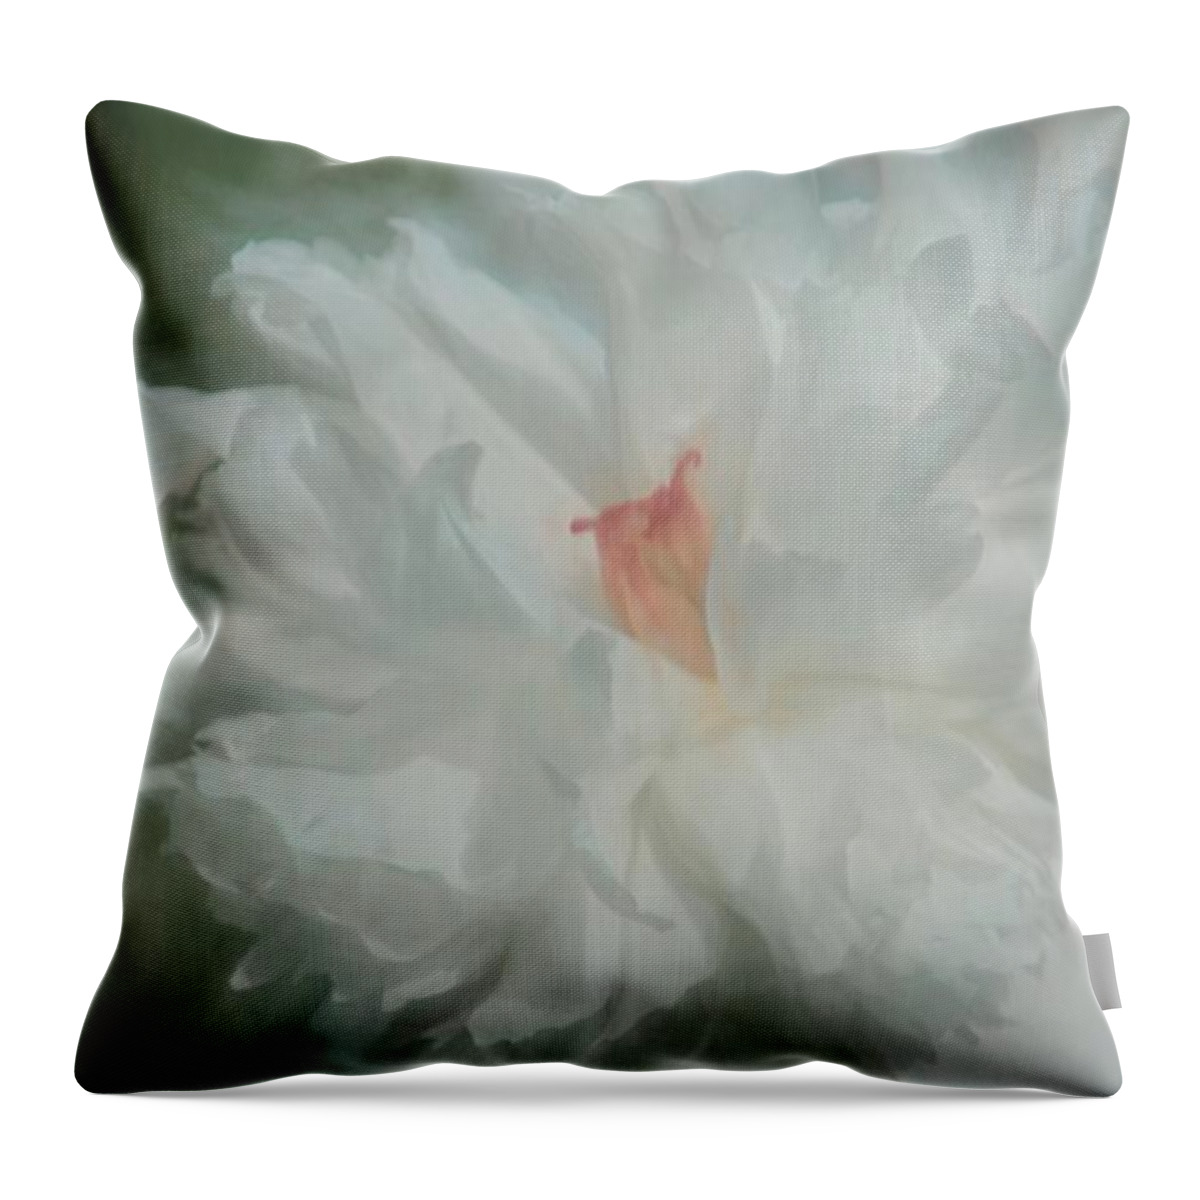 Peony Throw Pillow featuring the photograph White Peony by Benanne Stiens